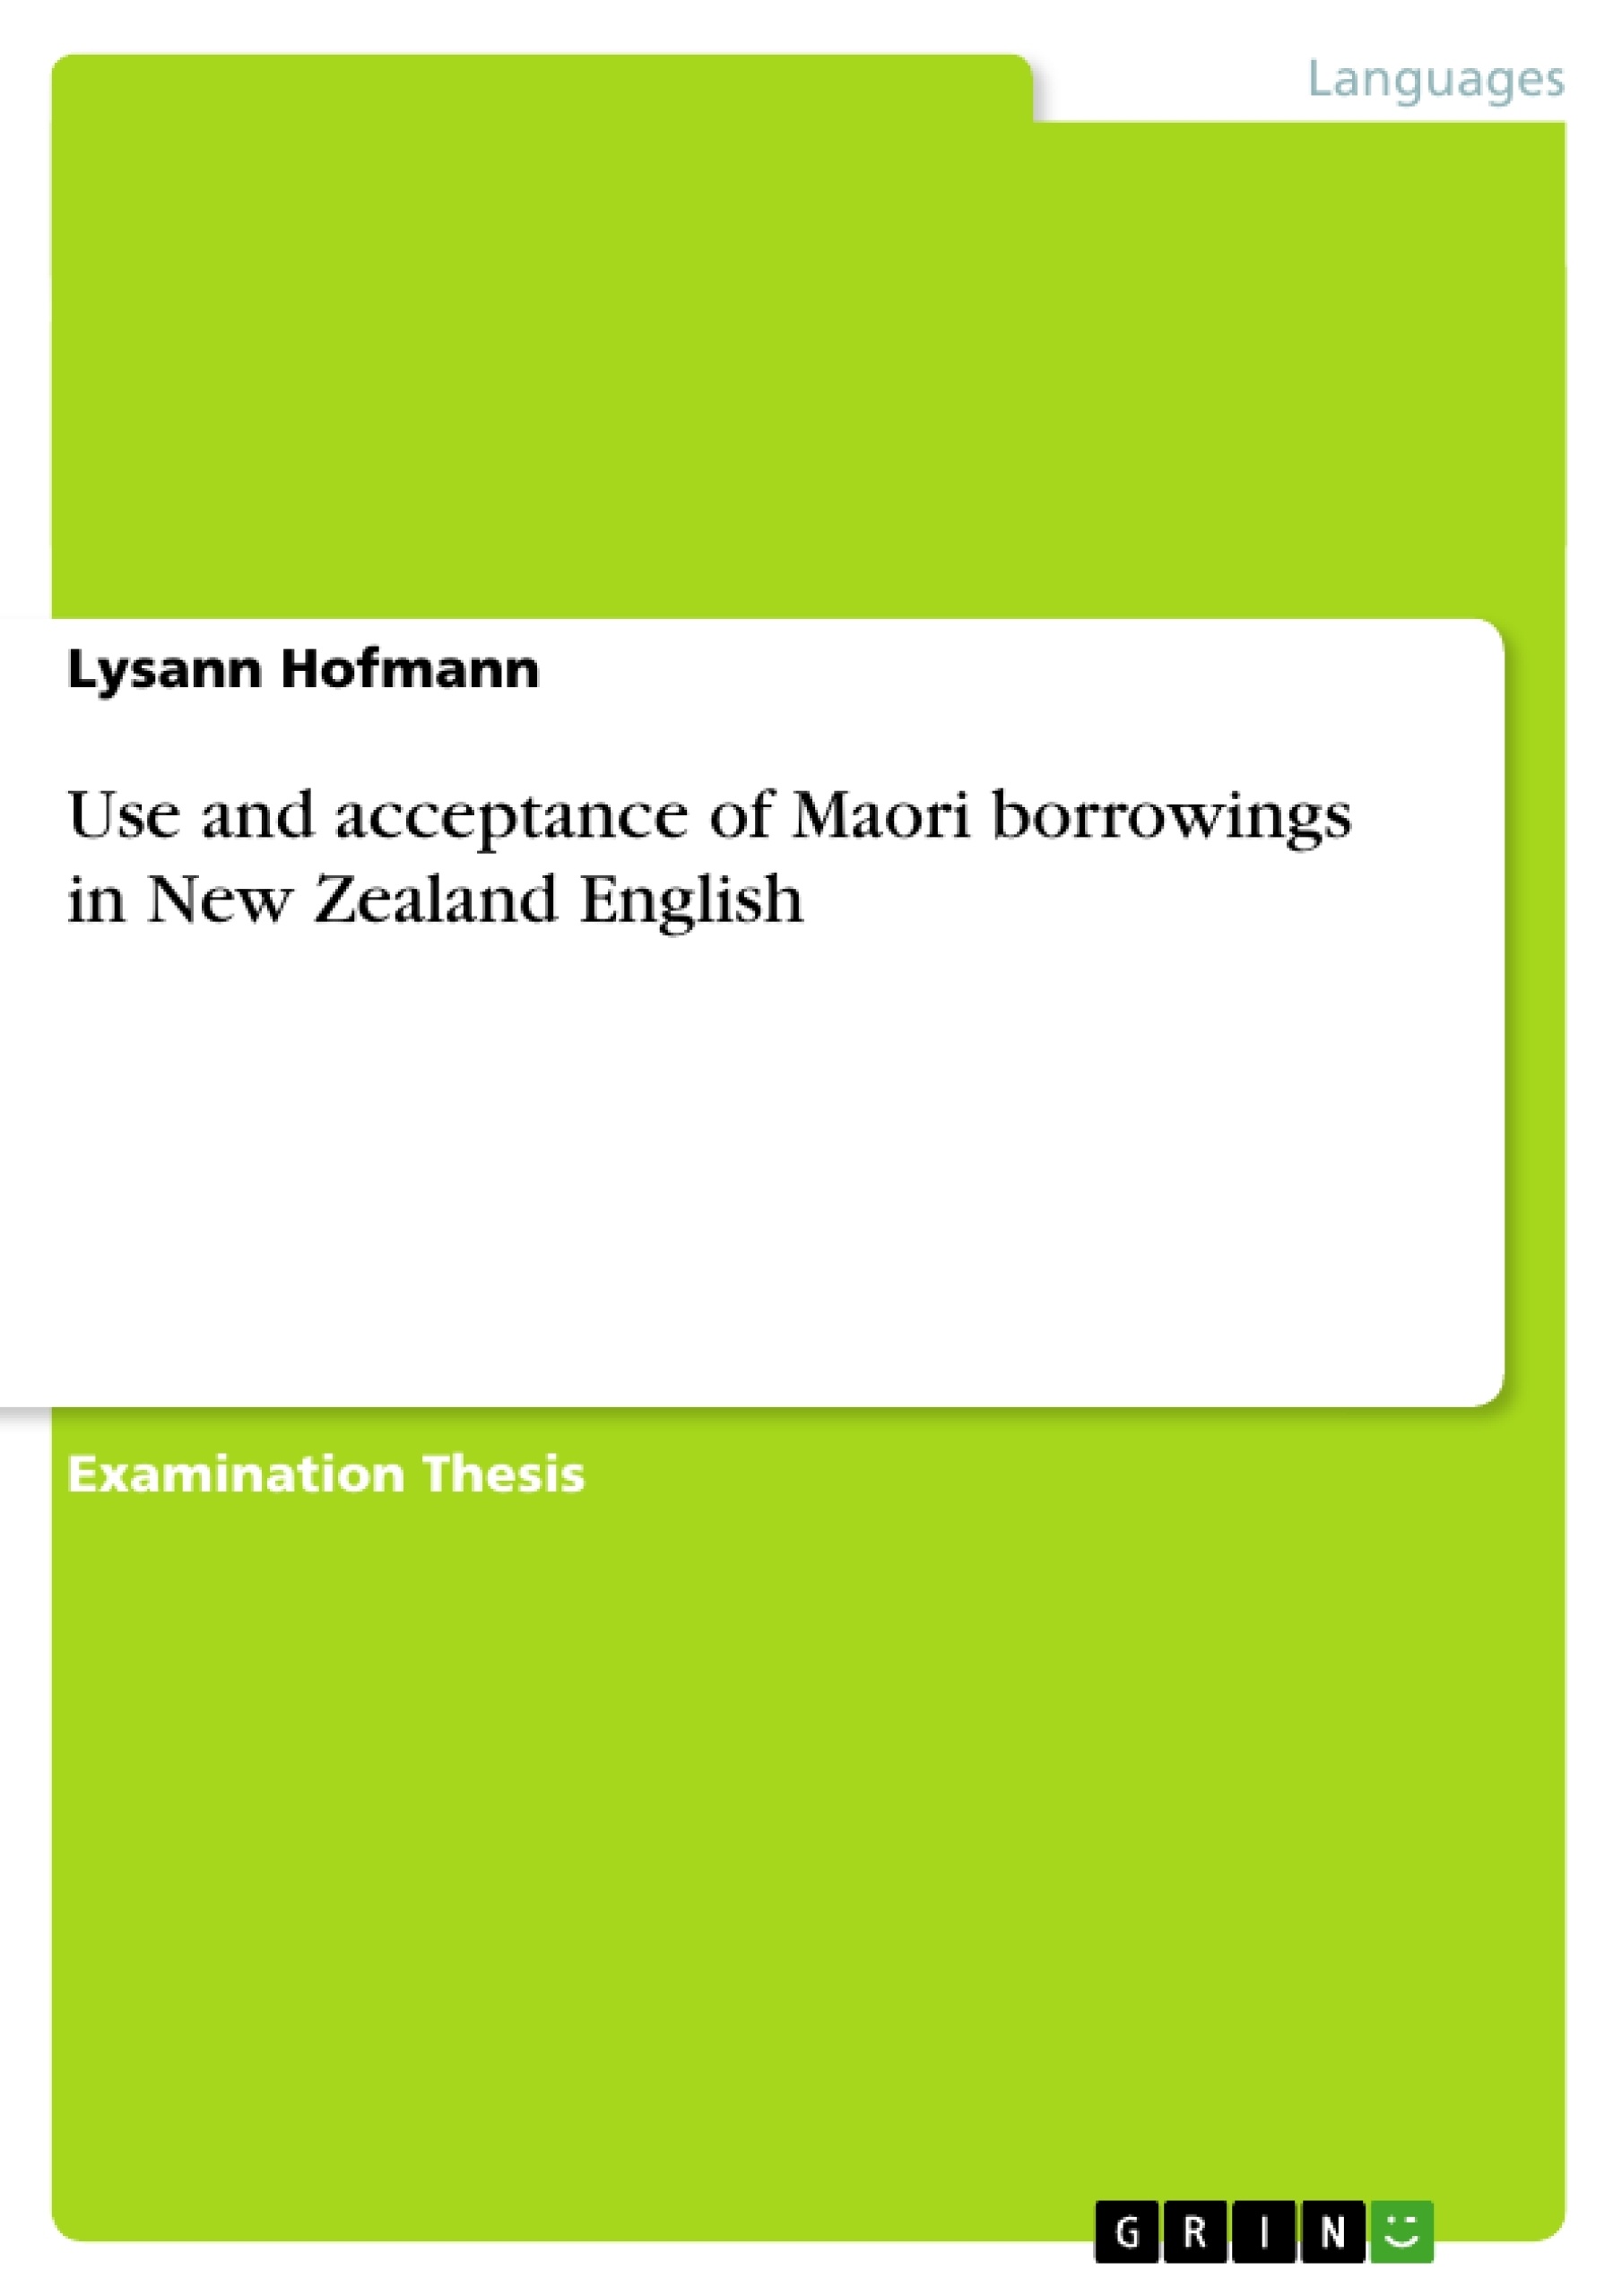 Título: Use and acceptance of Maori borrowings in New Zealand English